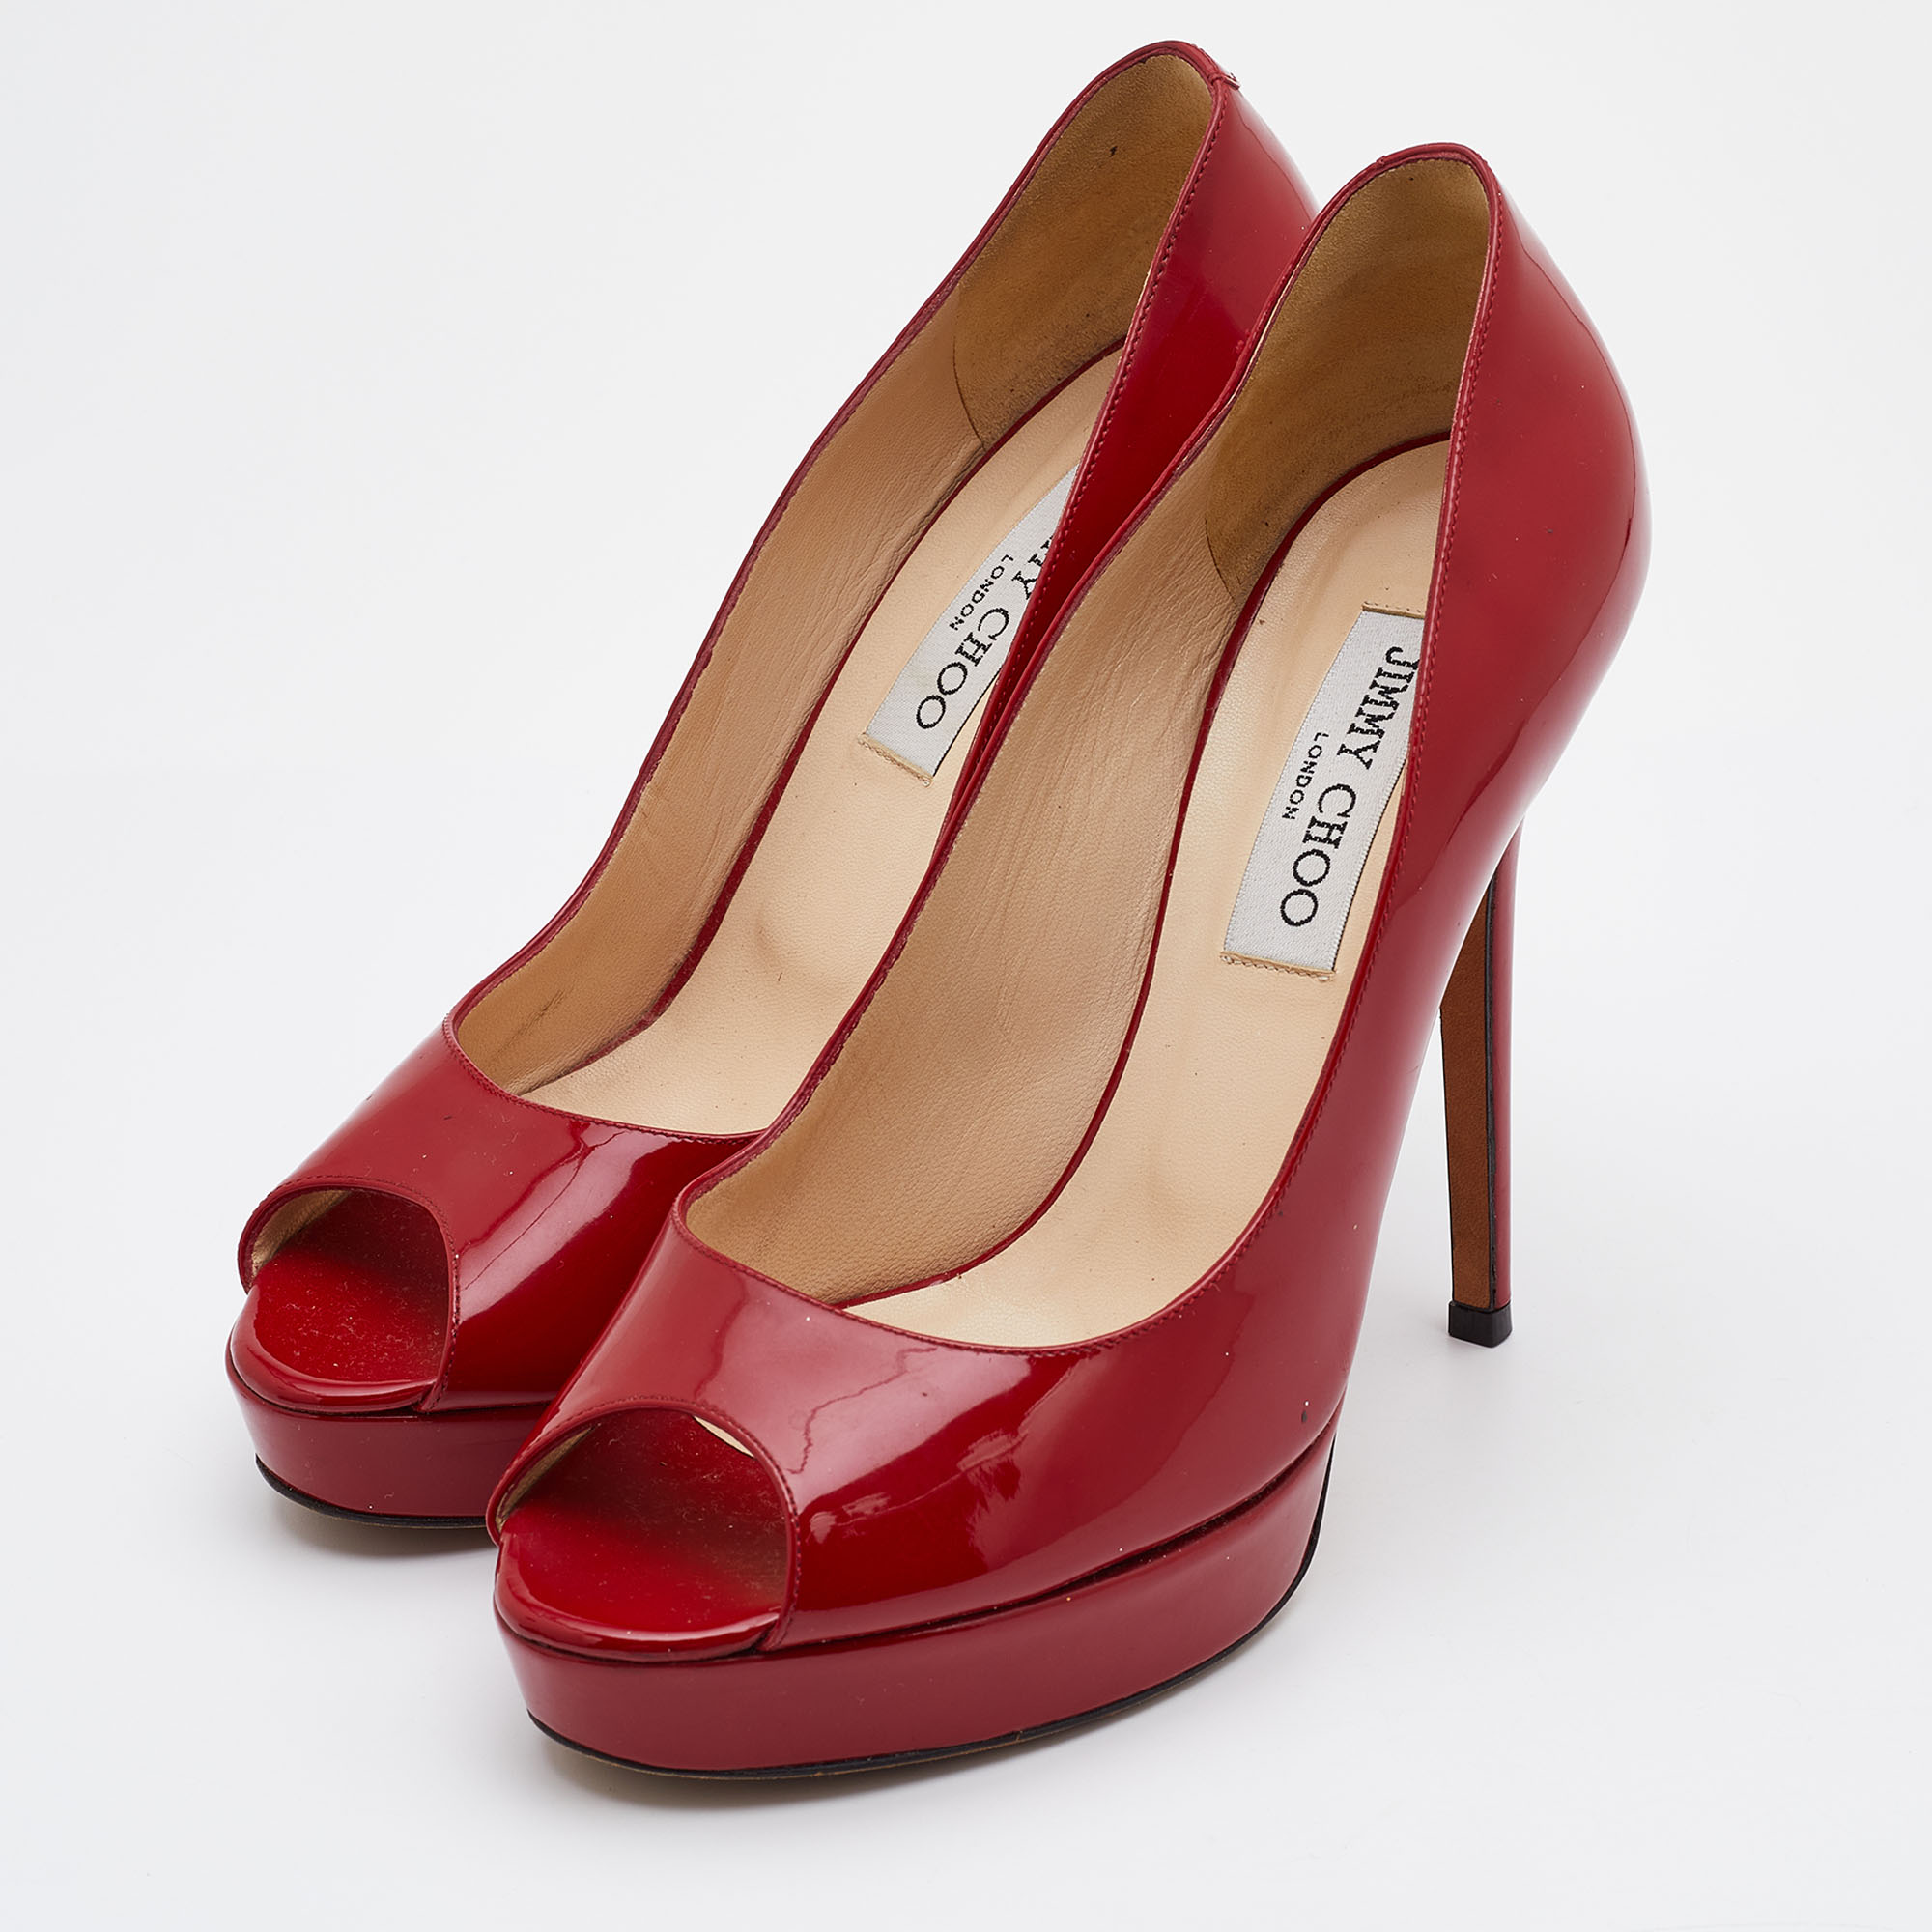 

Jimmy Choo Red Patent Leather Luna Pumps Size